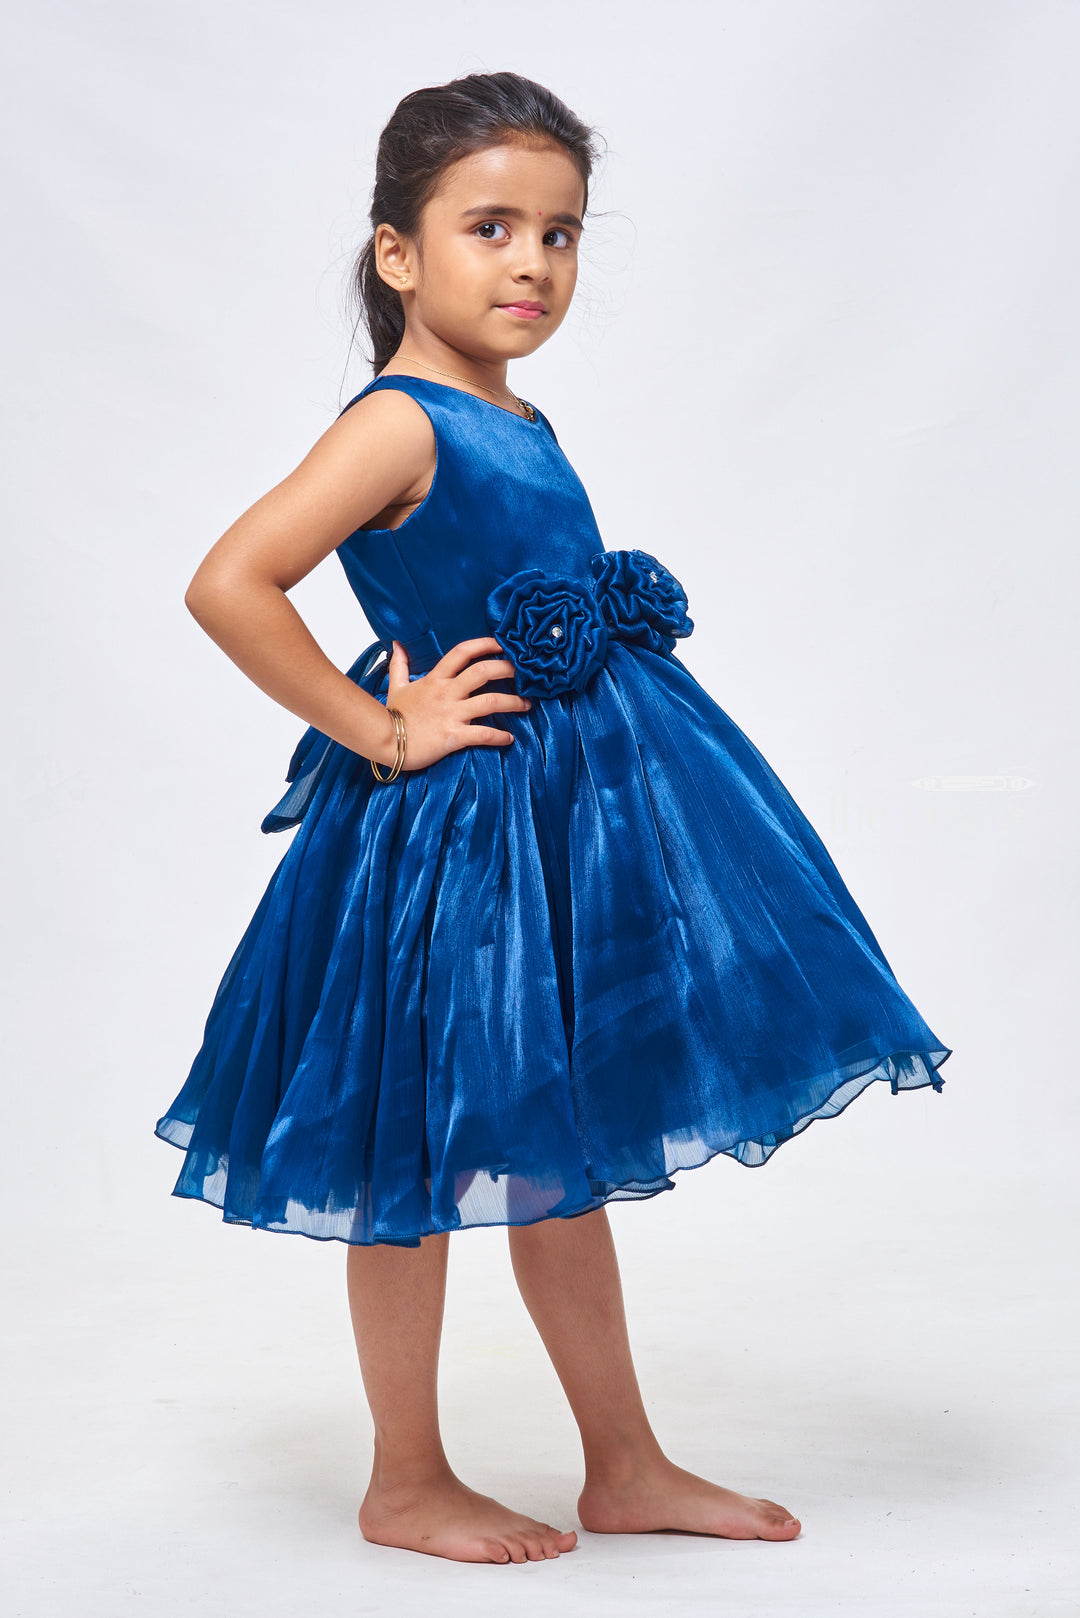 The Nesavu Girls Fancy Party Frock Blue Blossom: Charming Fabric Flower Applique on Pleated Organza Party Dress Nesavu Trendy Organza Party Dresses: Exclusive Baby Girl Frock Designs | The Nesavu